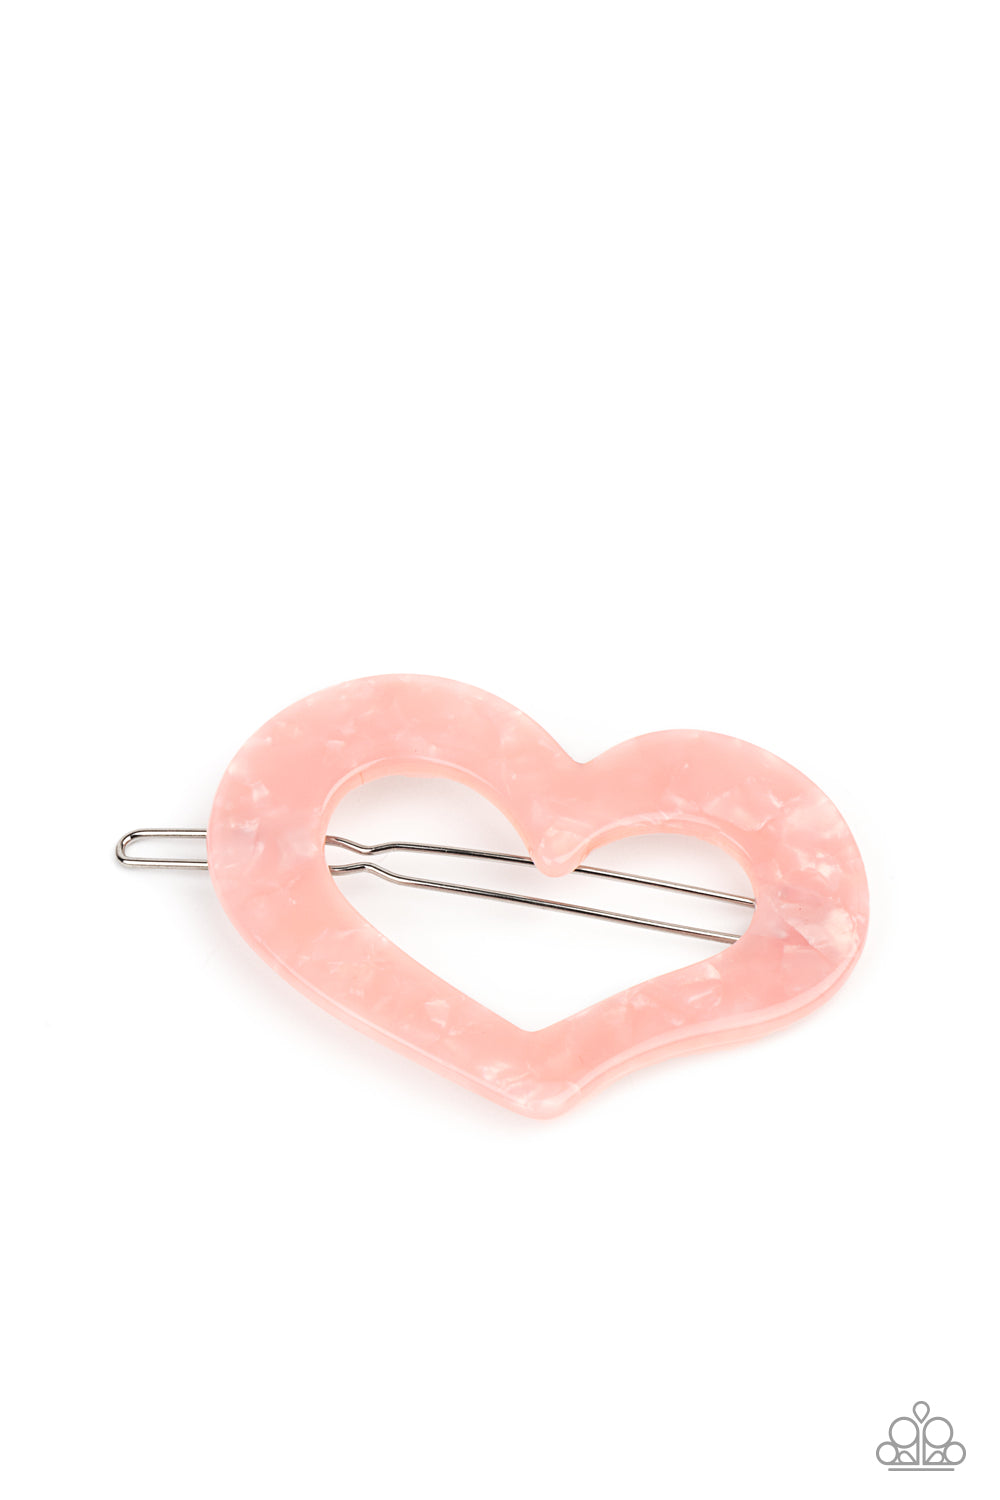 Paparazzi - HEART Not to Love - Pink Hair Clip